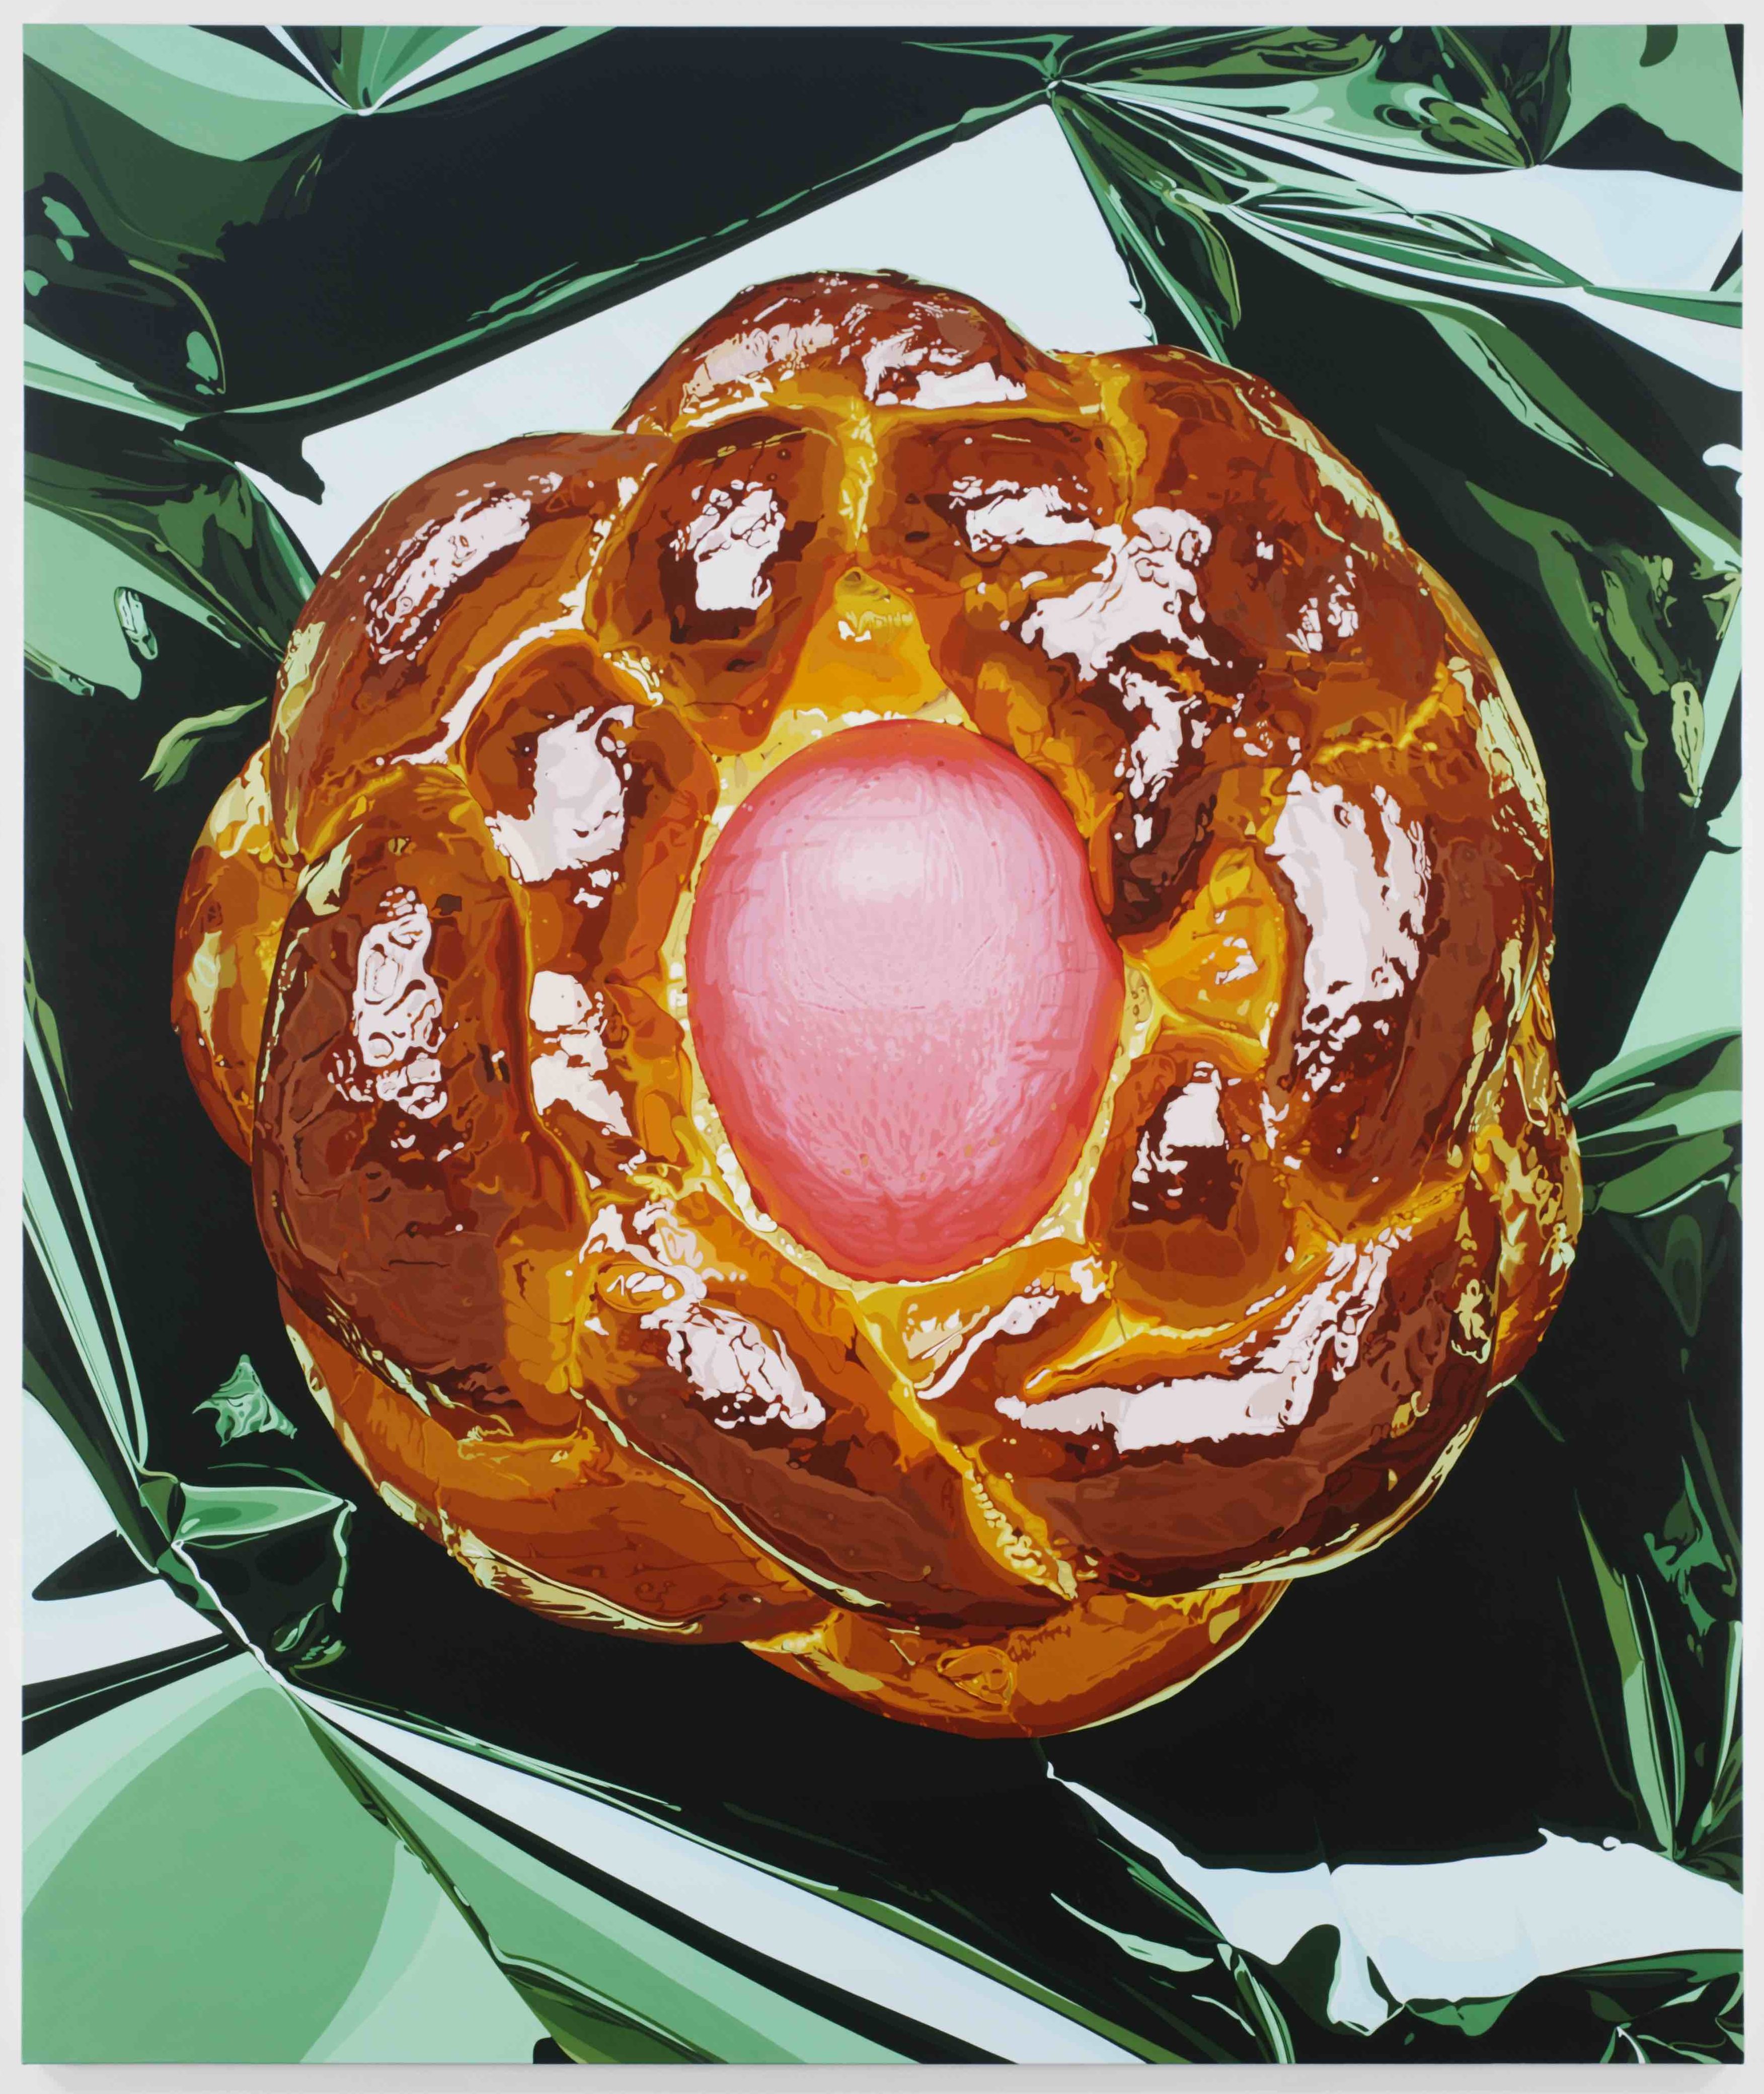 Bread with Egg, 1997